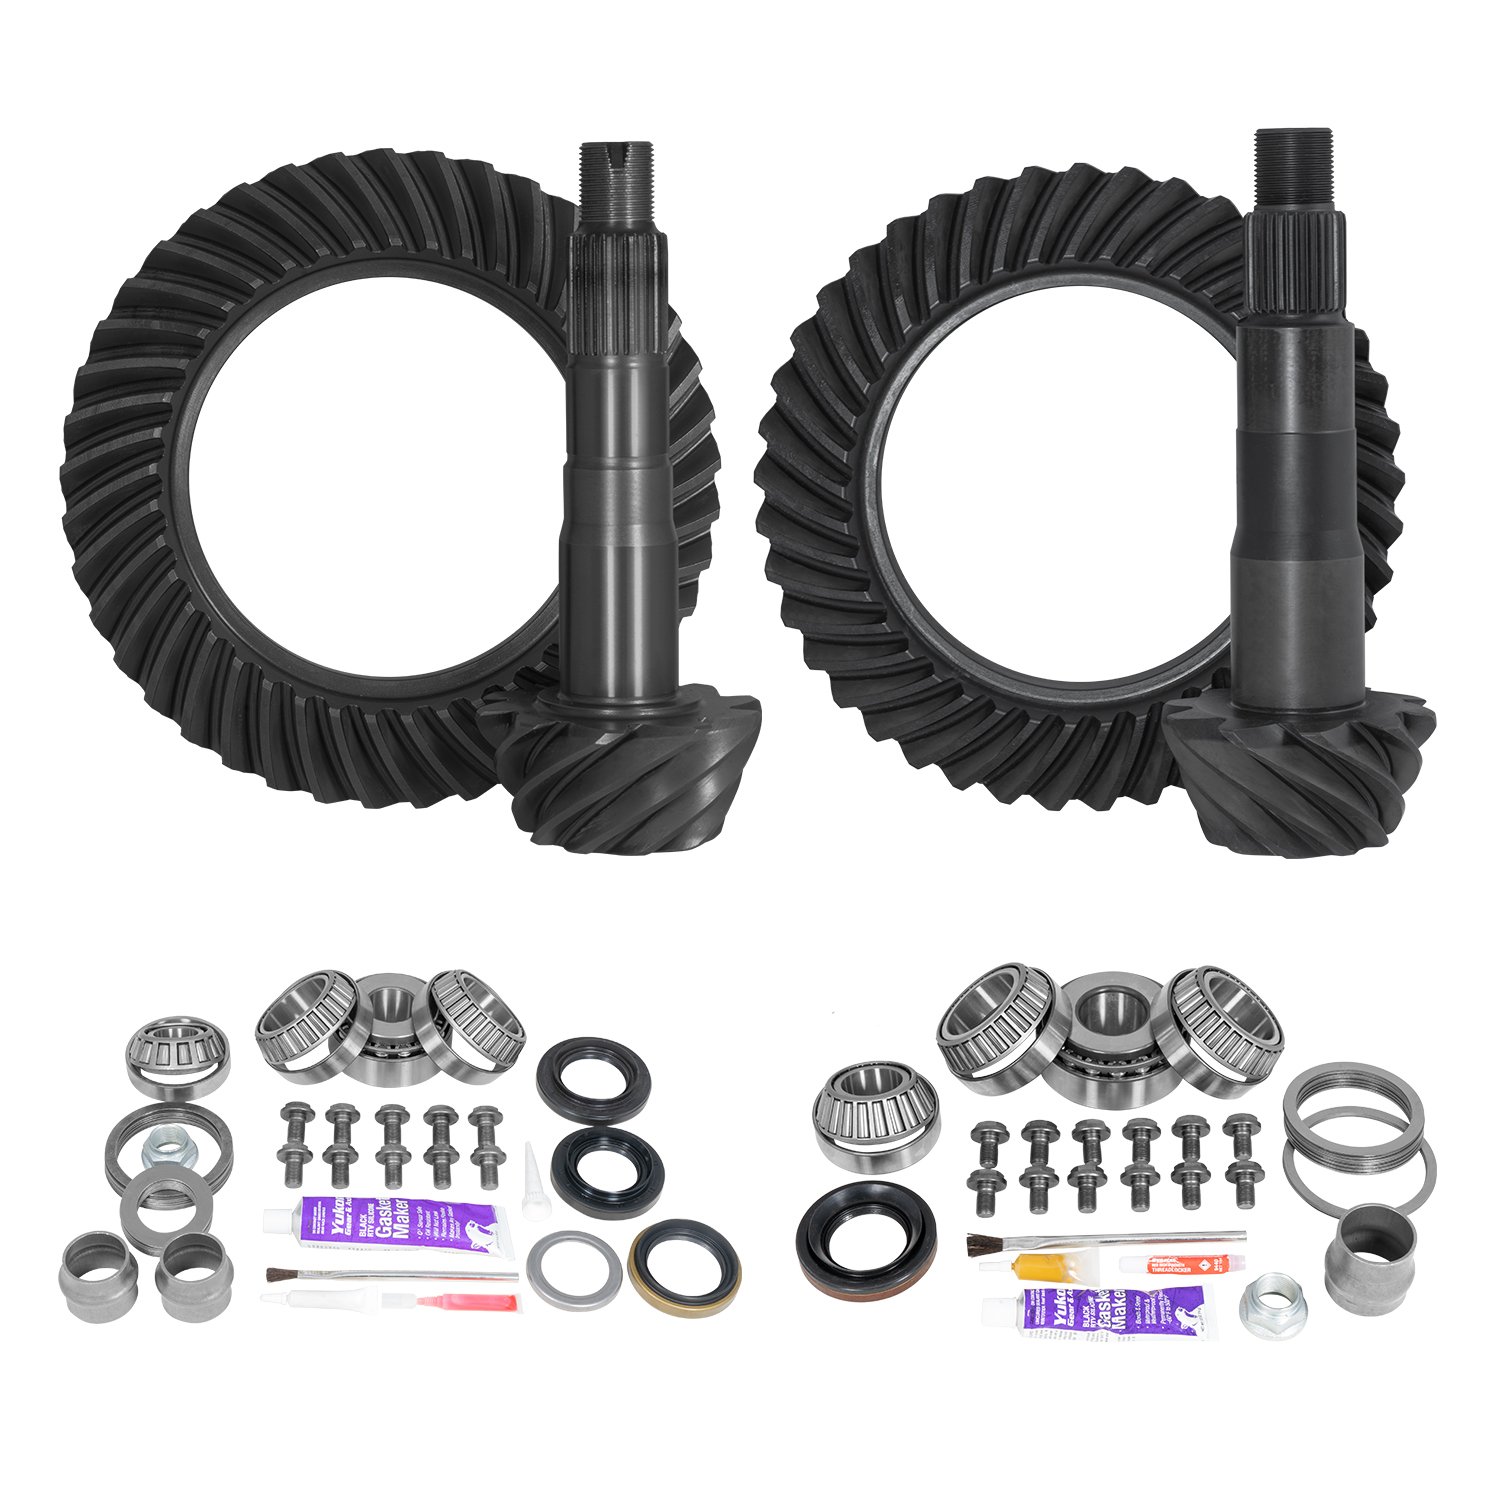 Ring & Pinion Gear Kit Package Front & Rear With Install Kits - Toyota 8.2/8 in.Ifs